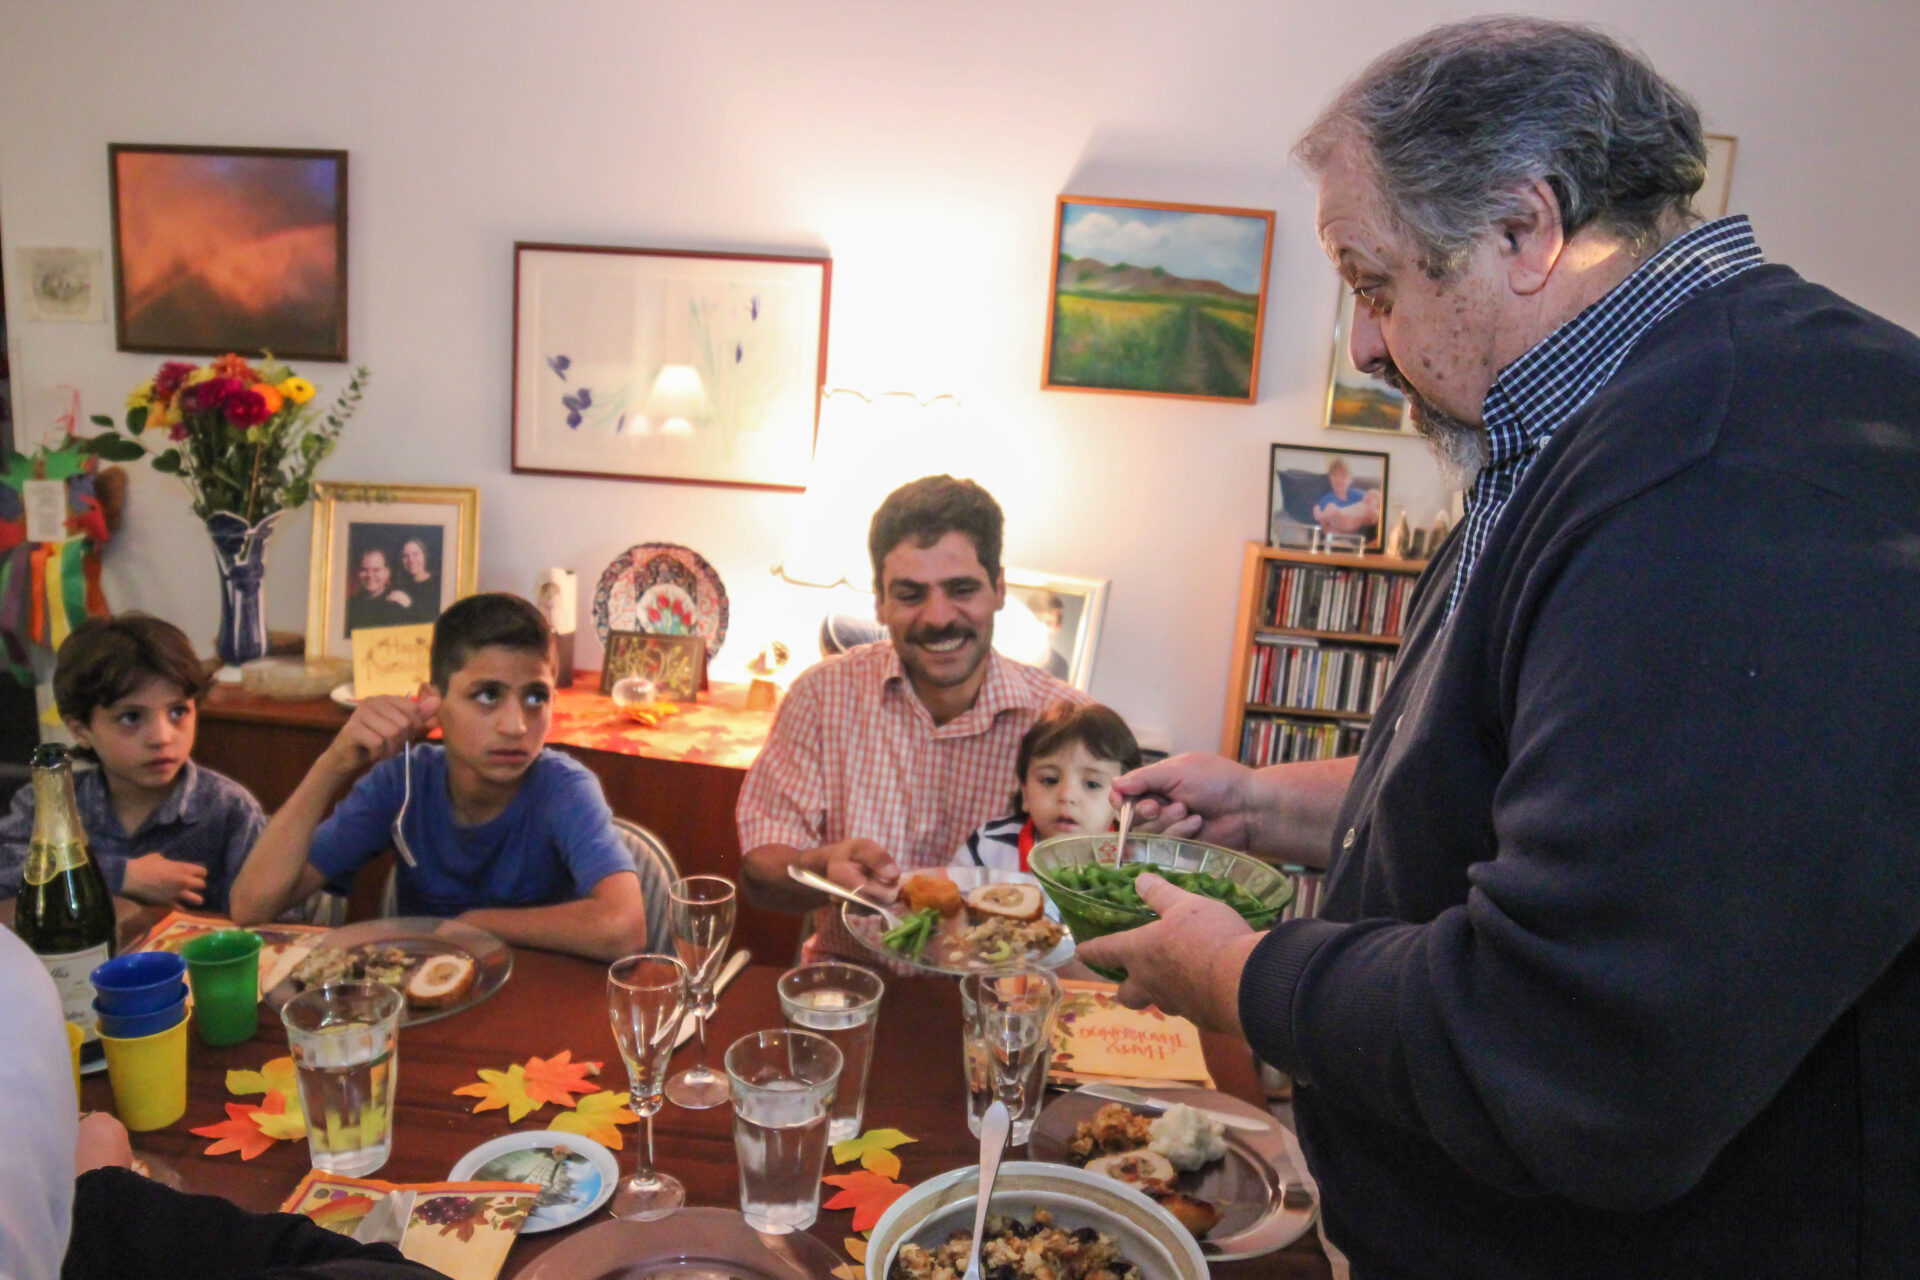 The Kaders of Tempe welcomed a Syrian refugee family to their home to share a holiday feast. (Wrangler News photo by Alex J. Walker)